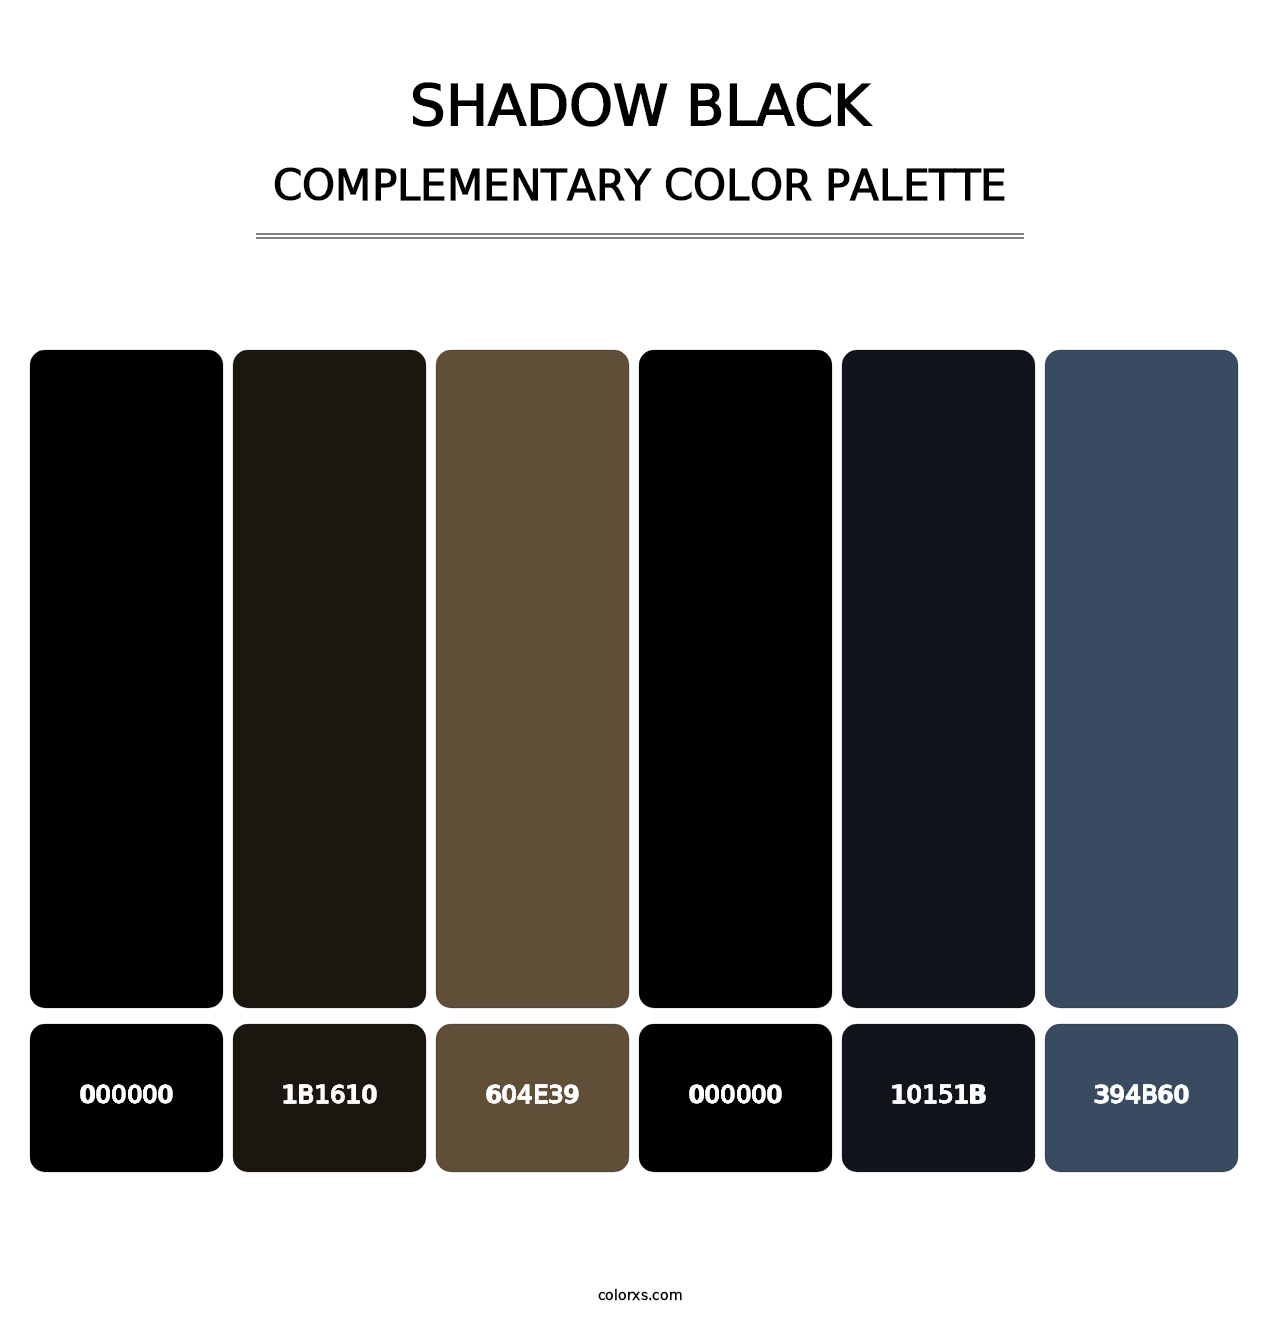 Shadow Black - Complementary Color Palette